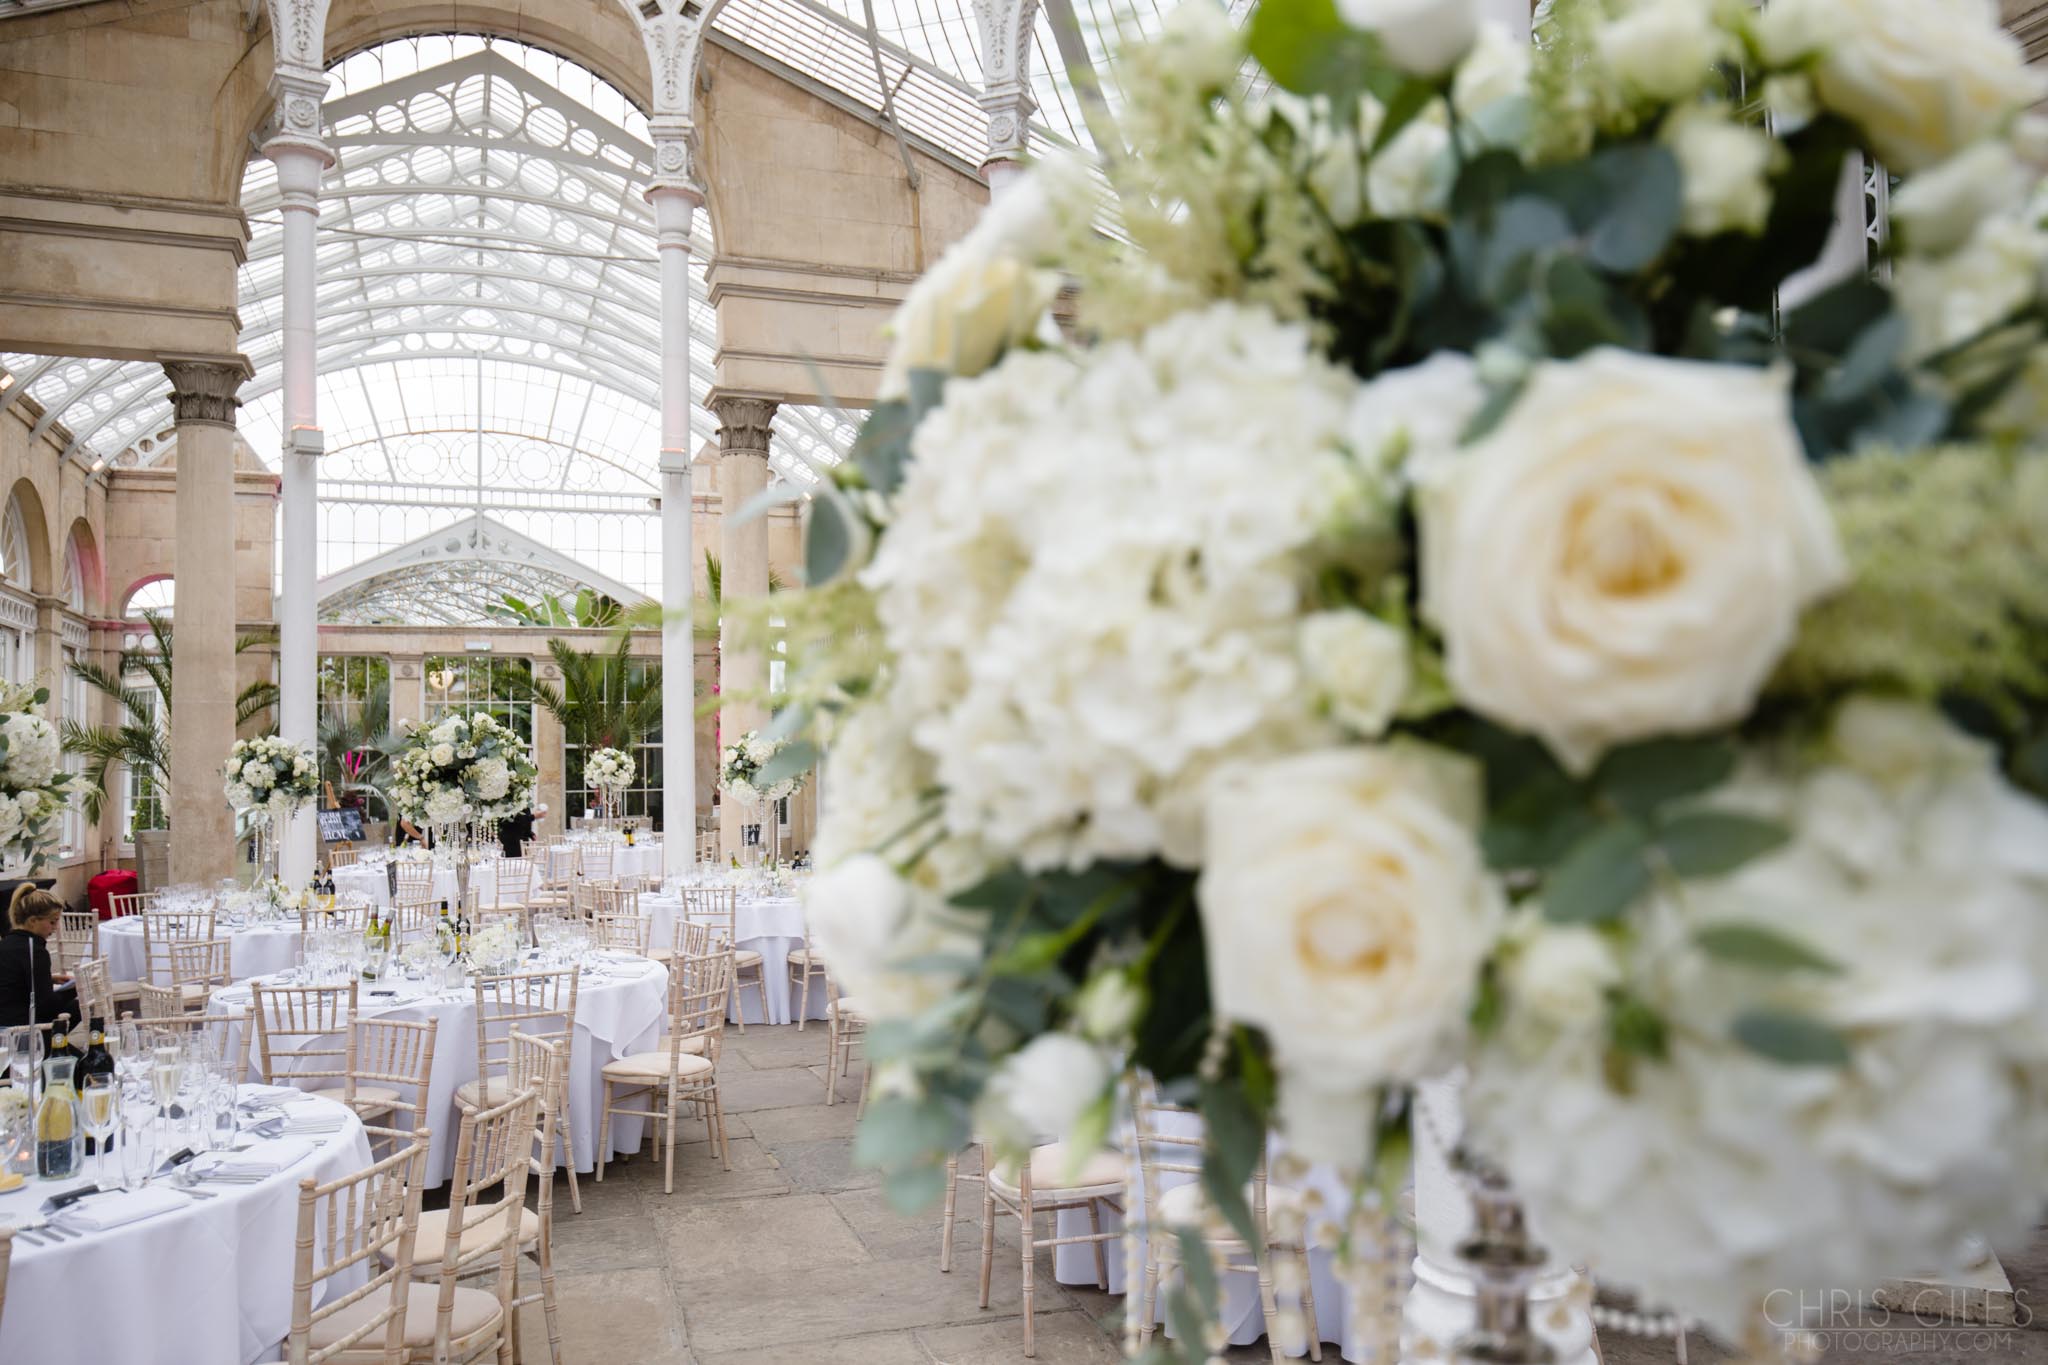 The Great Conservatory at Syon Park